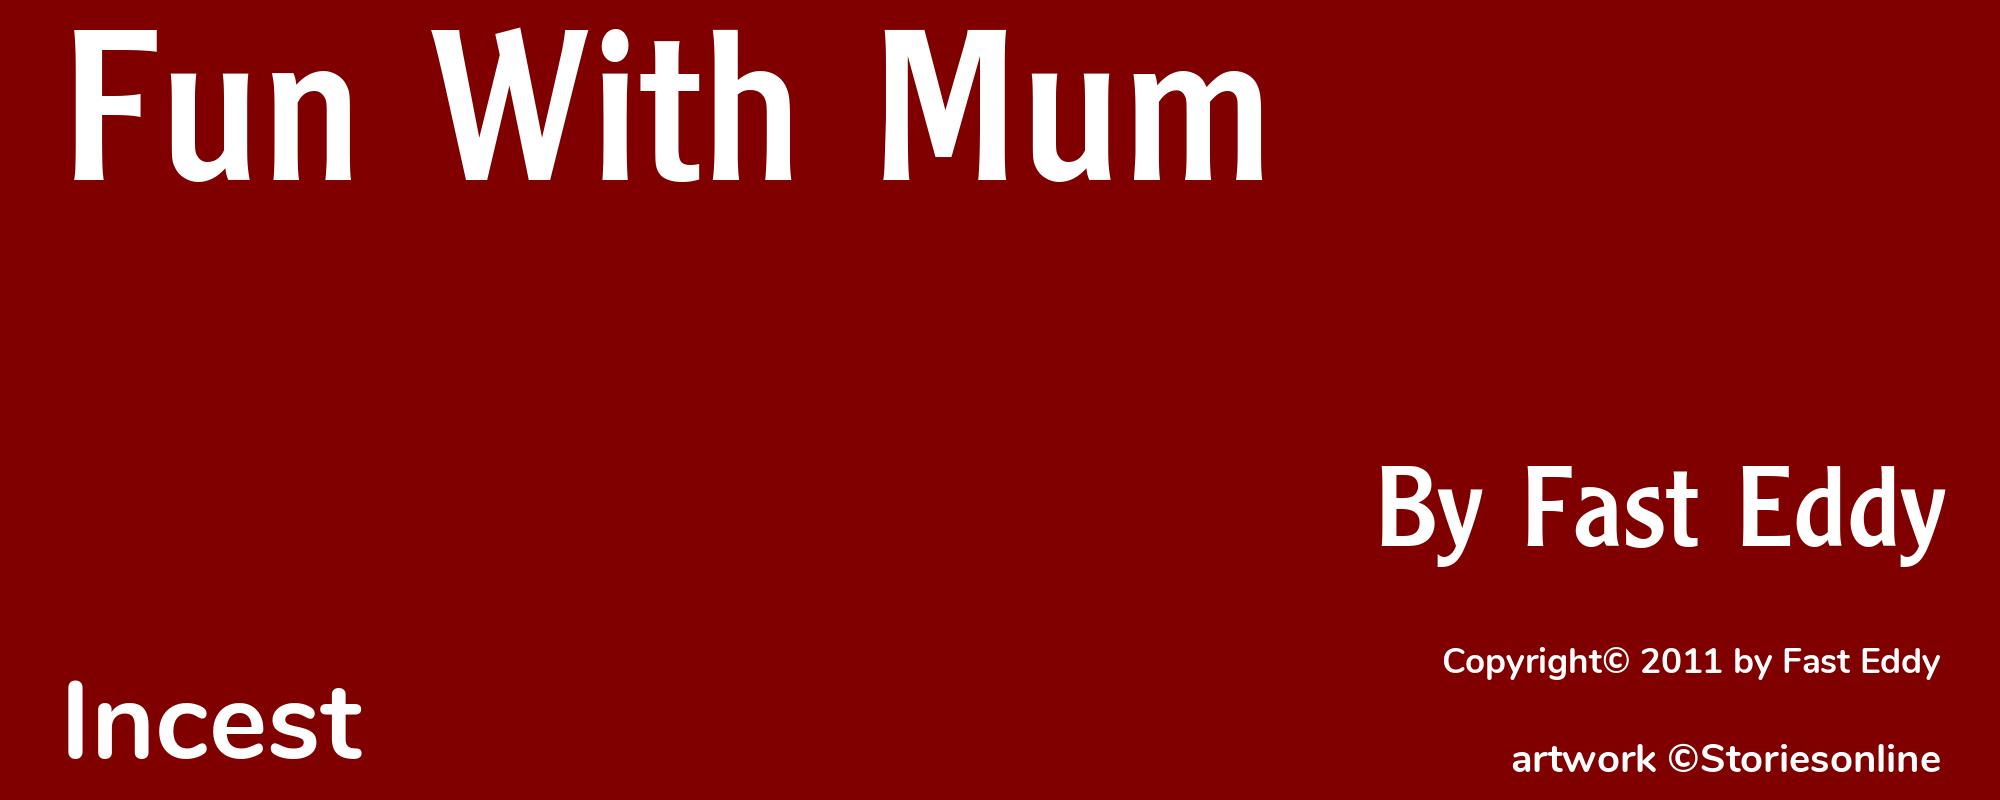 Fun With Mum - Cover